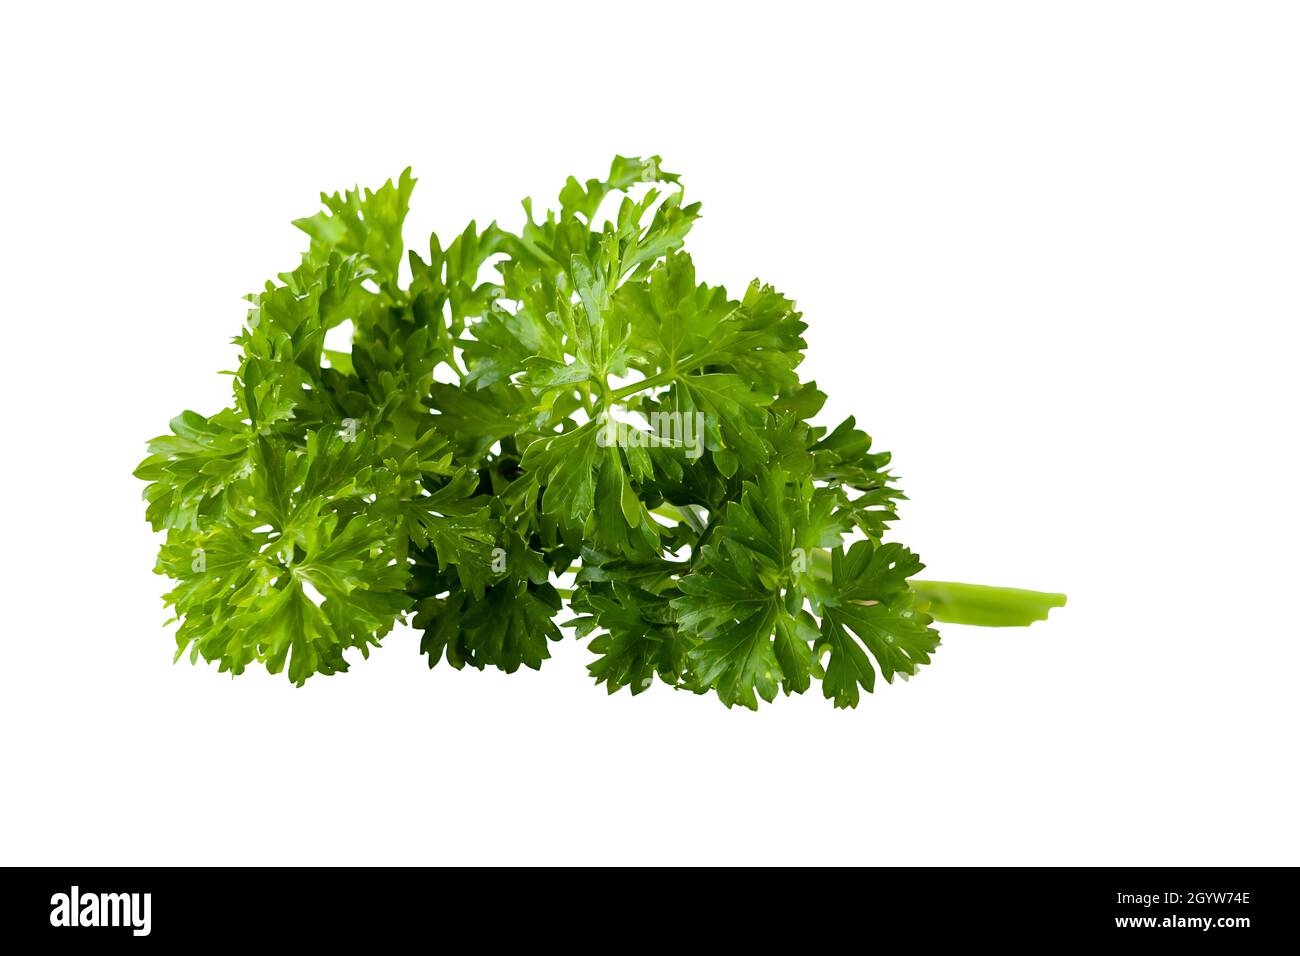 parsley bunch tied with cord isolated on white background Stock Photo